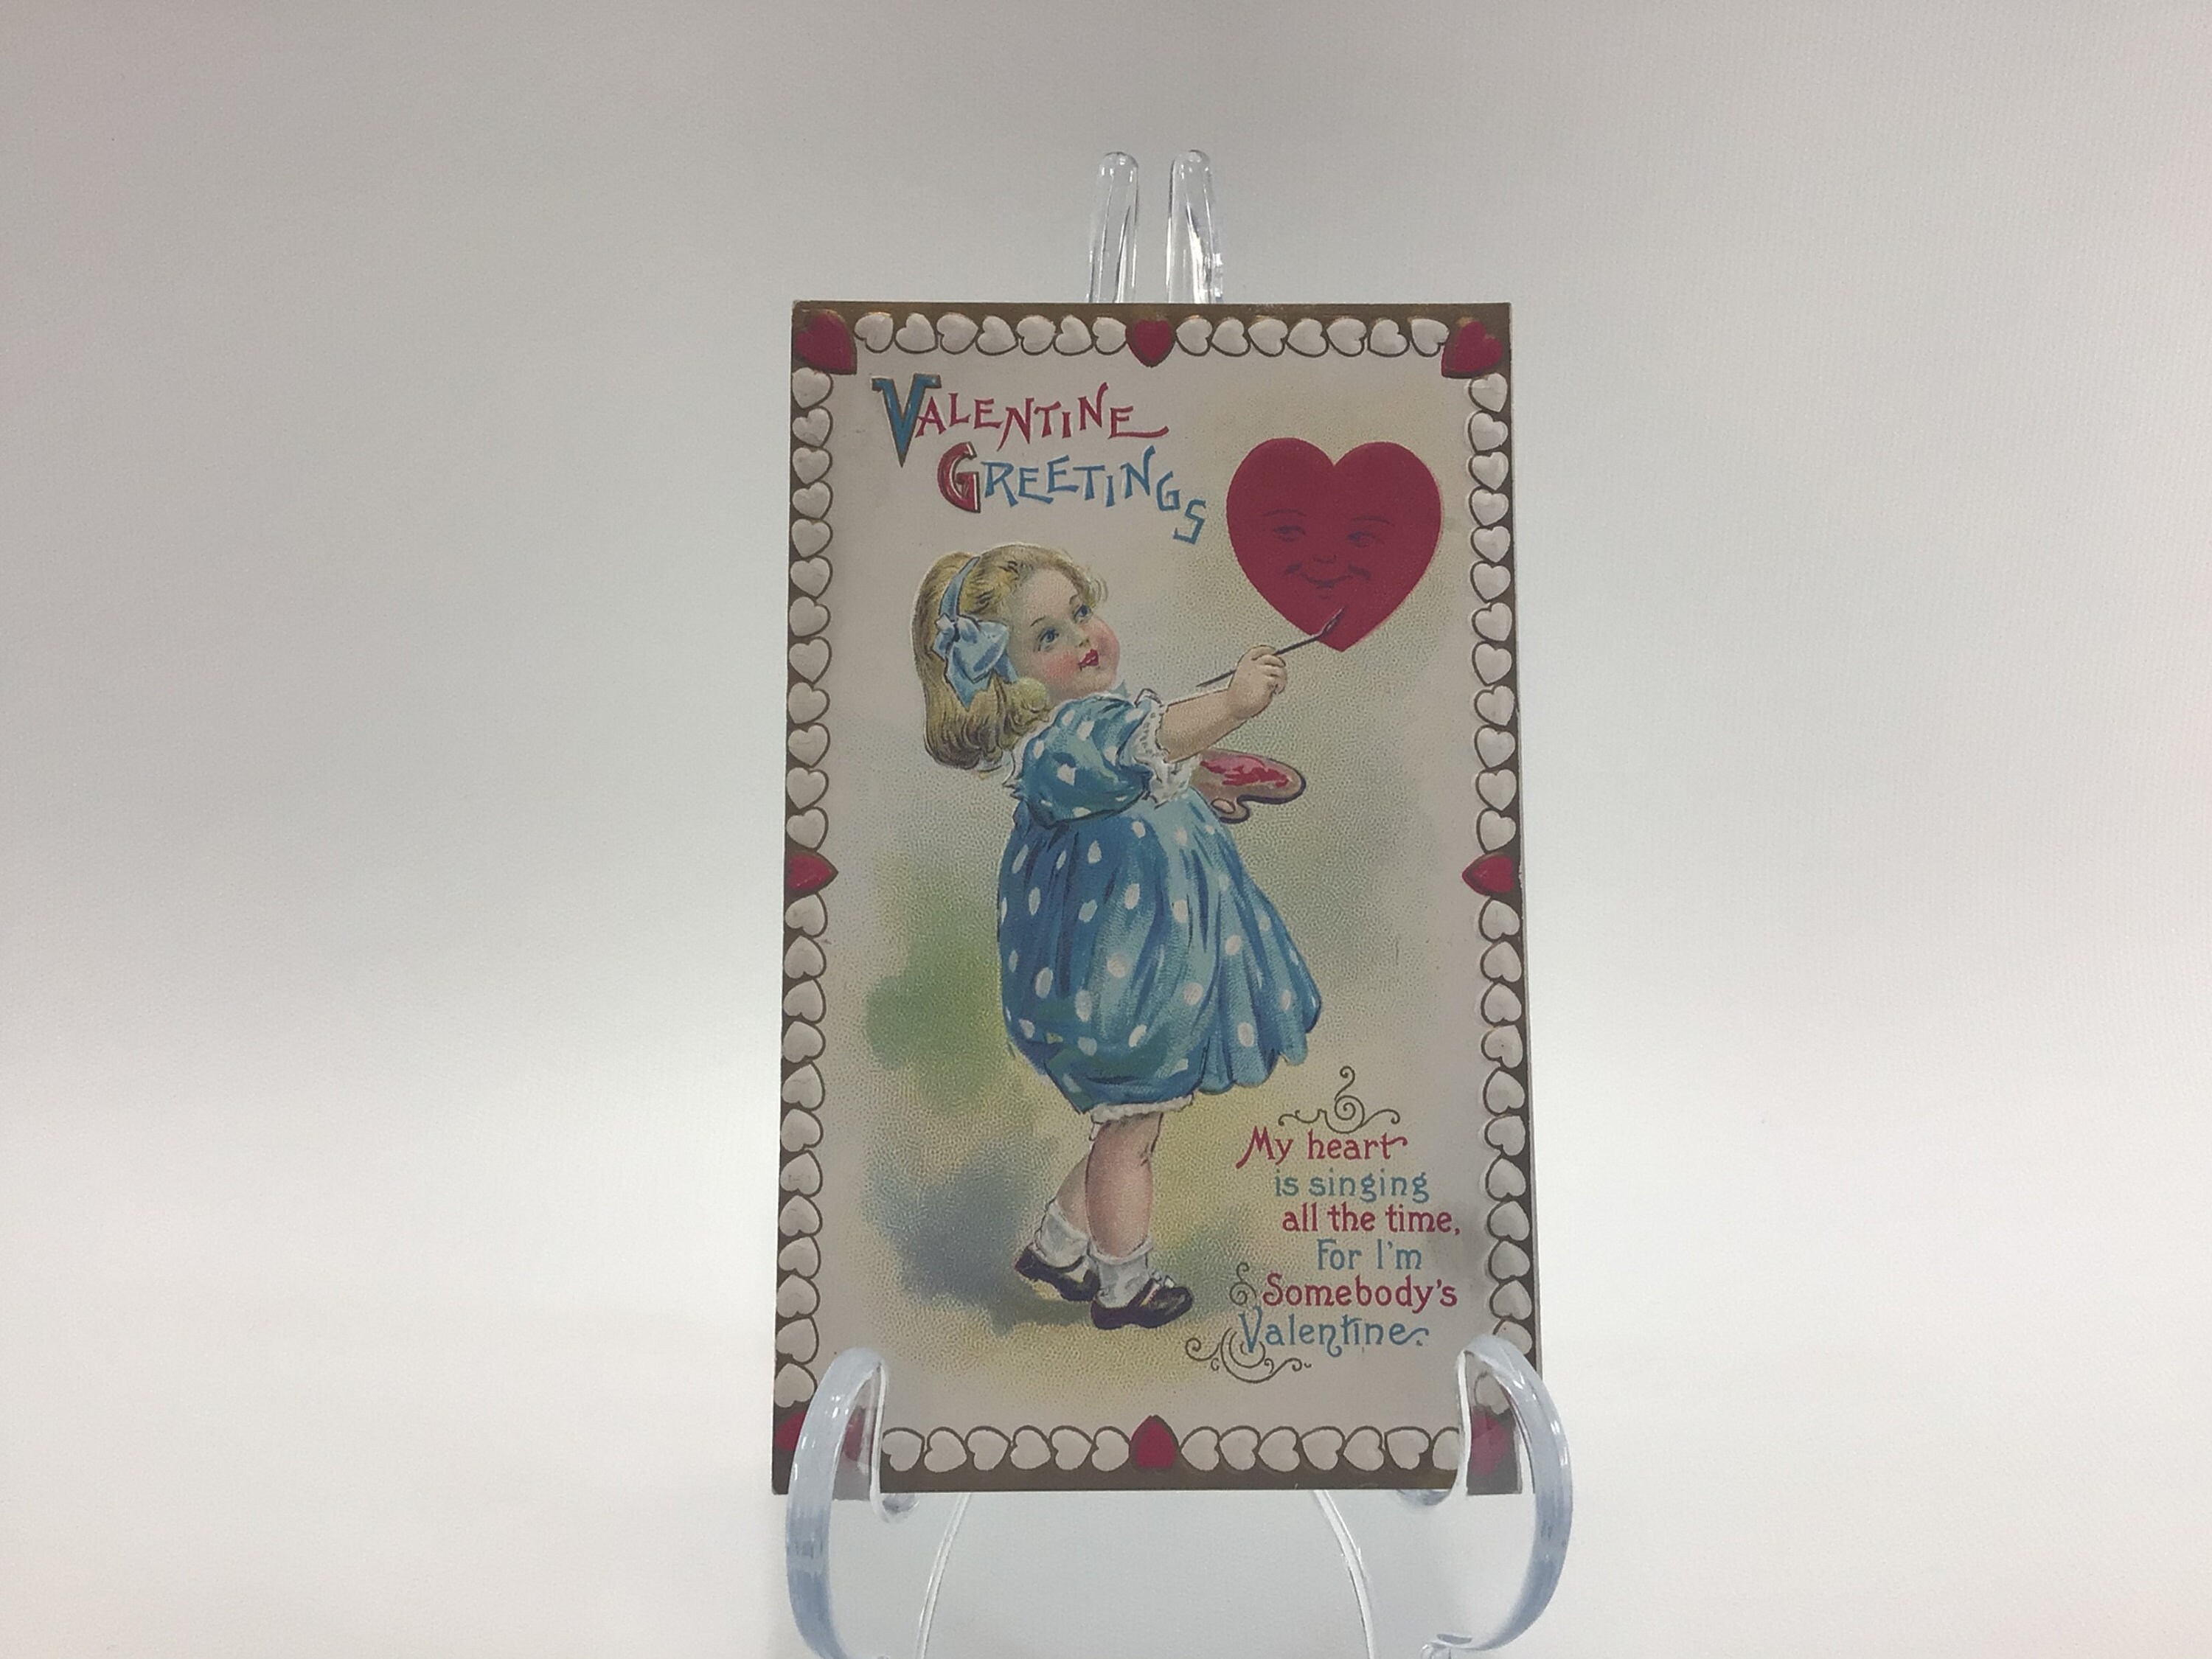 Vintage Valentine's Day Card With Girl Handing Boy a Card Mechanical  Greeting Cards Hearts Cupid Love Holiday Decor Ephemera 